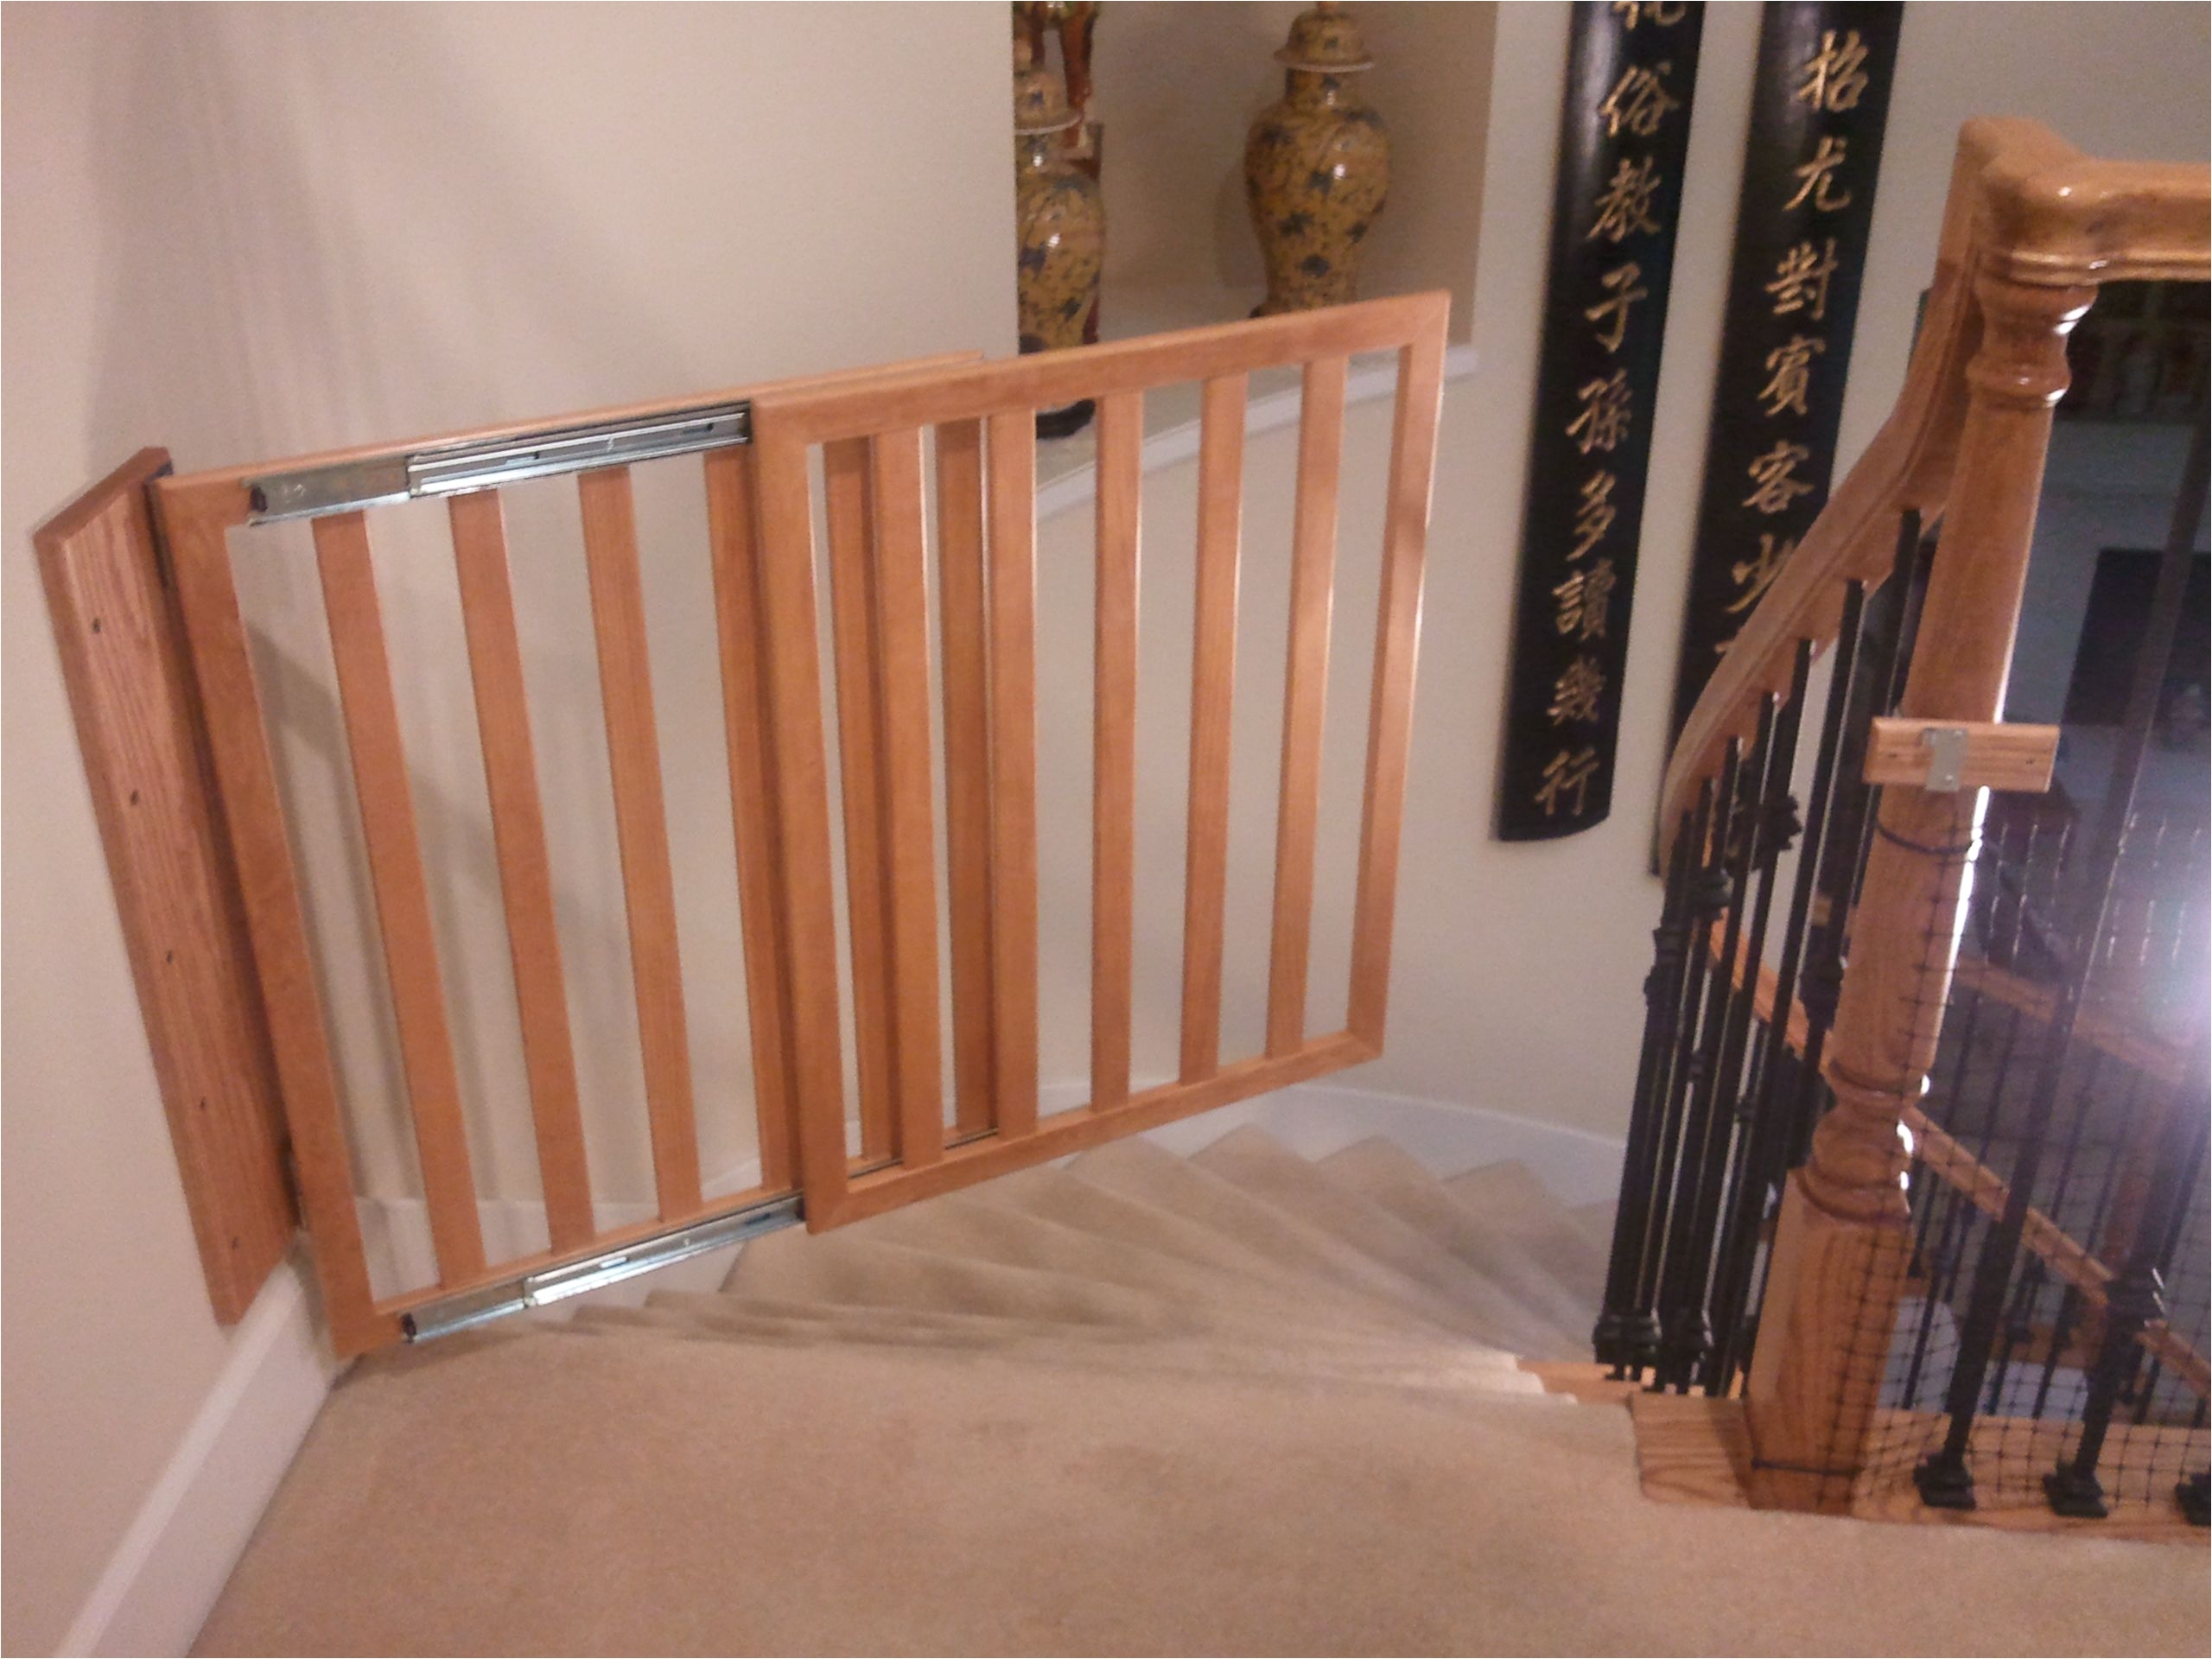 accessible below provides complete engineering drawings and construction guidelines for a wooden baby gate the gate is designed to keep